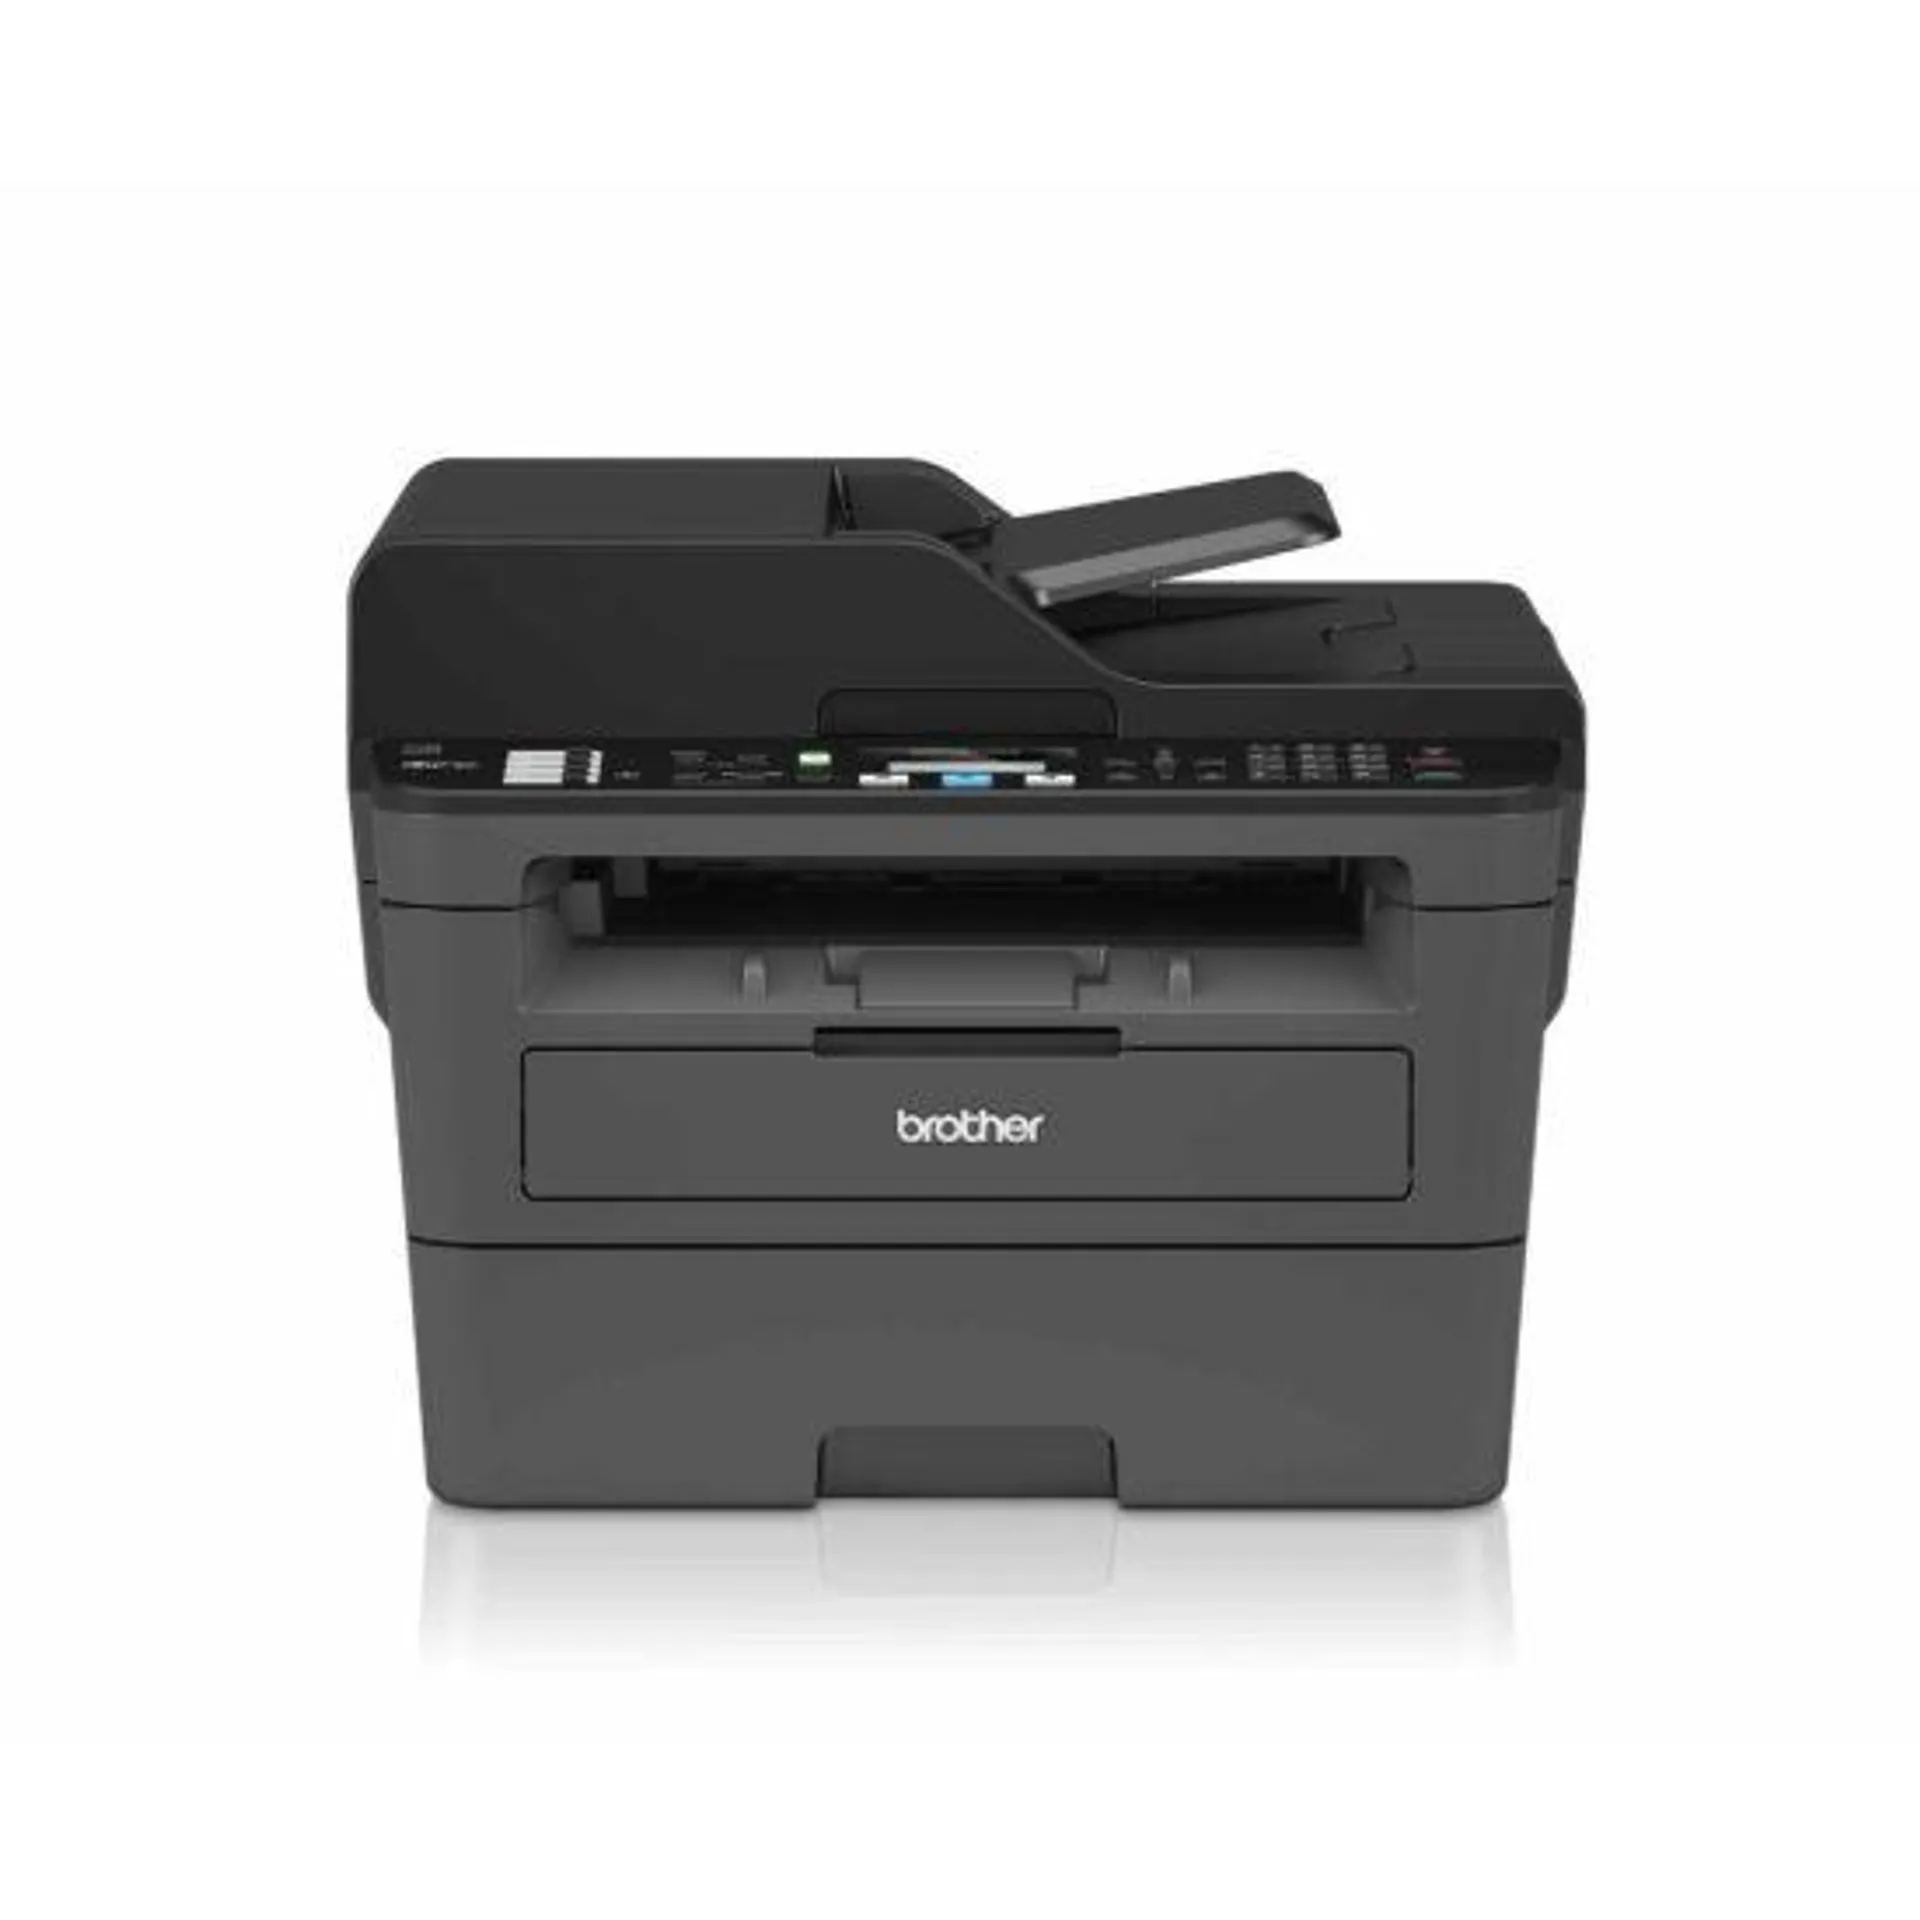 Brother MFC-L2710DW All in One Wireless Mono Laser Printer with Fax